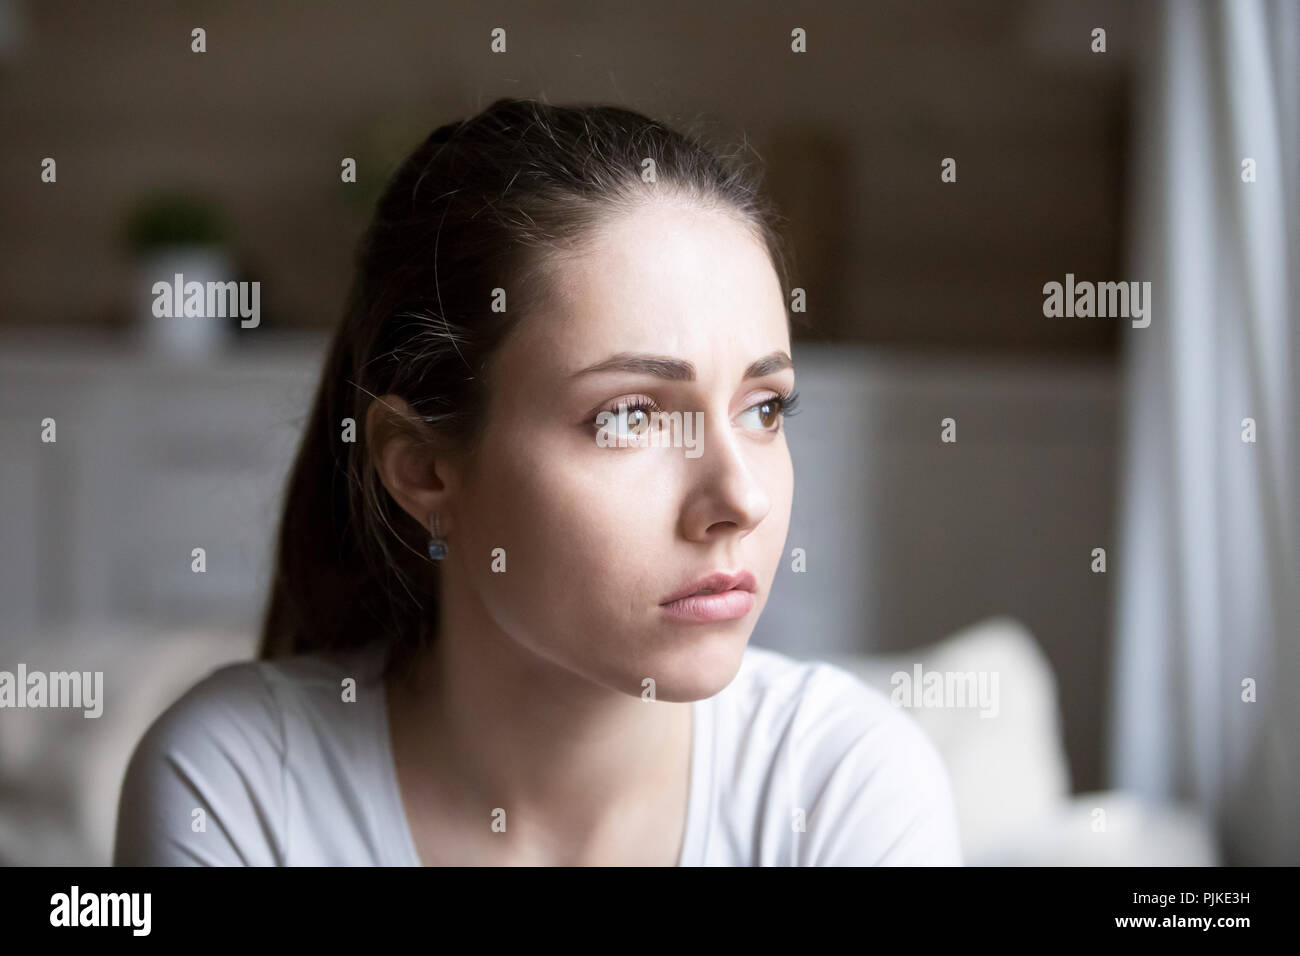 Sad woman looking far away thinking about personal problems Stock Photo